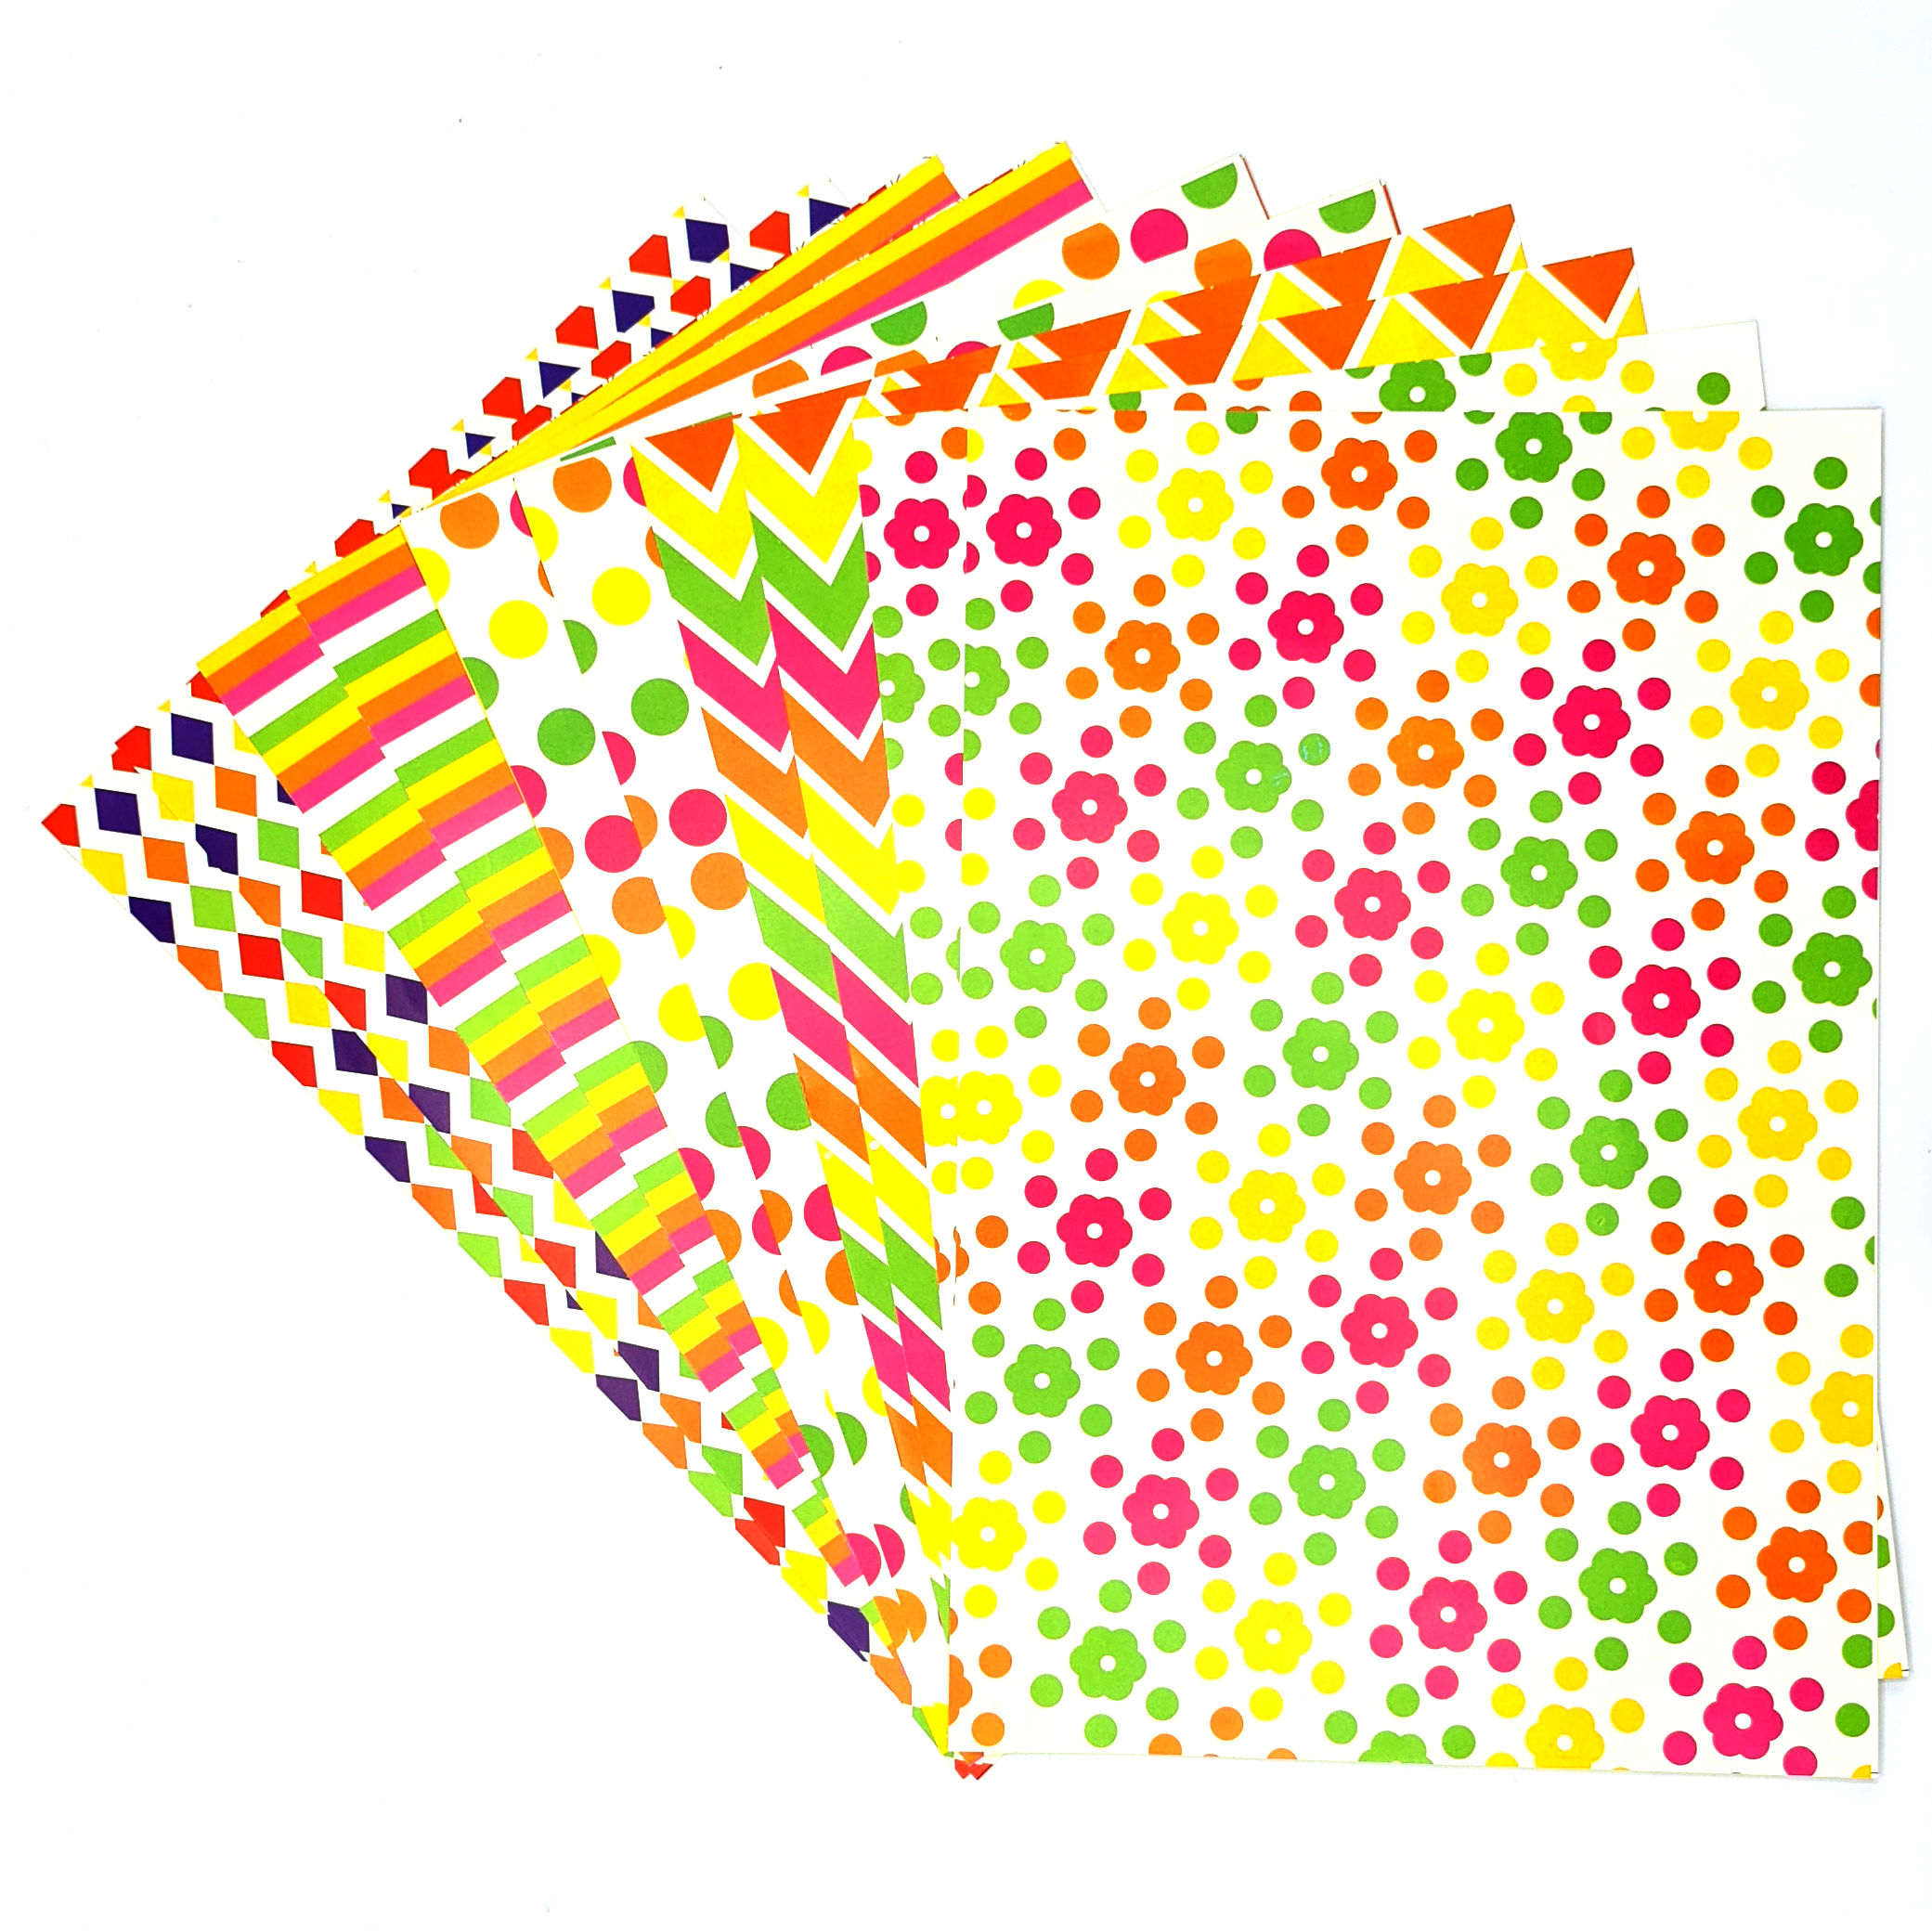 10 Sheets of A4 Size Colorful Design Paper (5 Patterns)